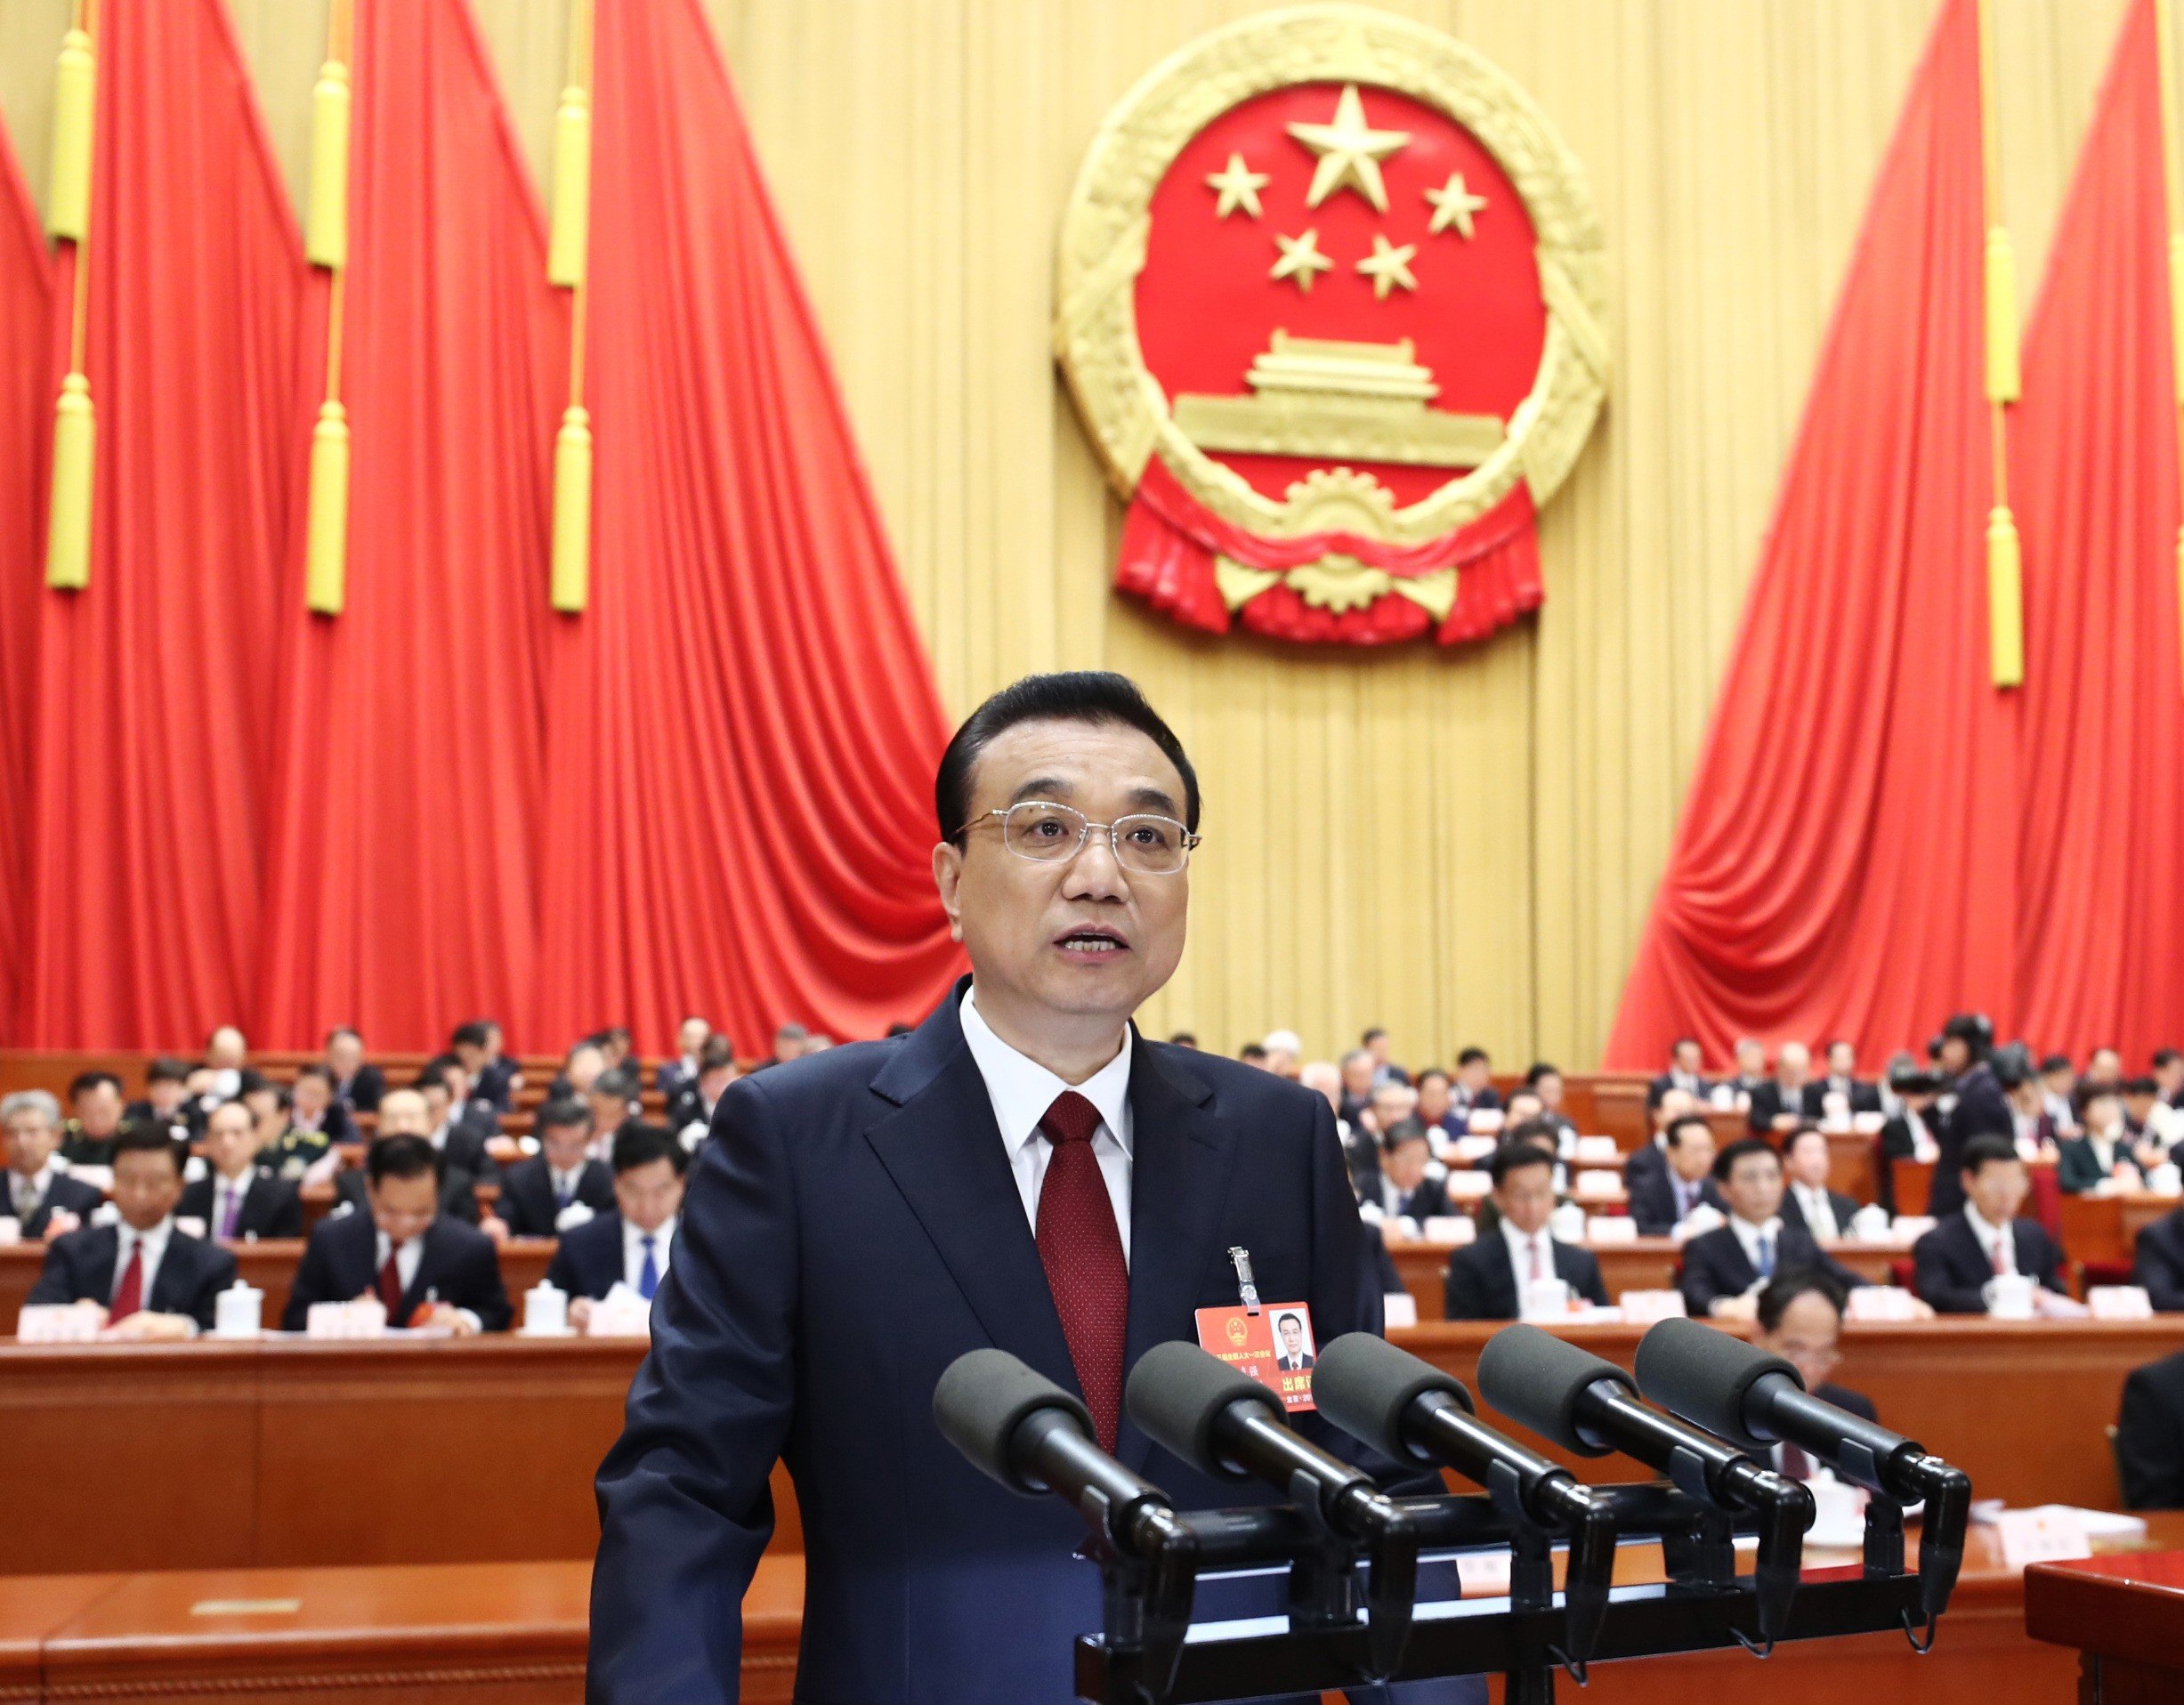 Premier Li Keqiang outlined comprehensive plans for China’s economic and social development. Photo: Xinhua